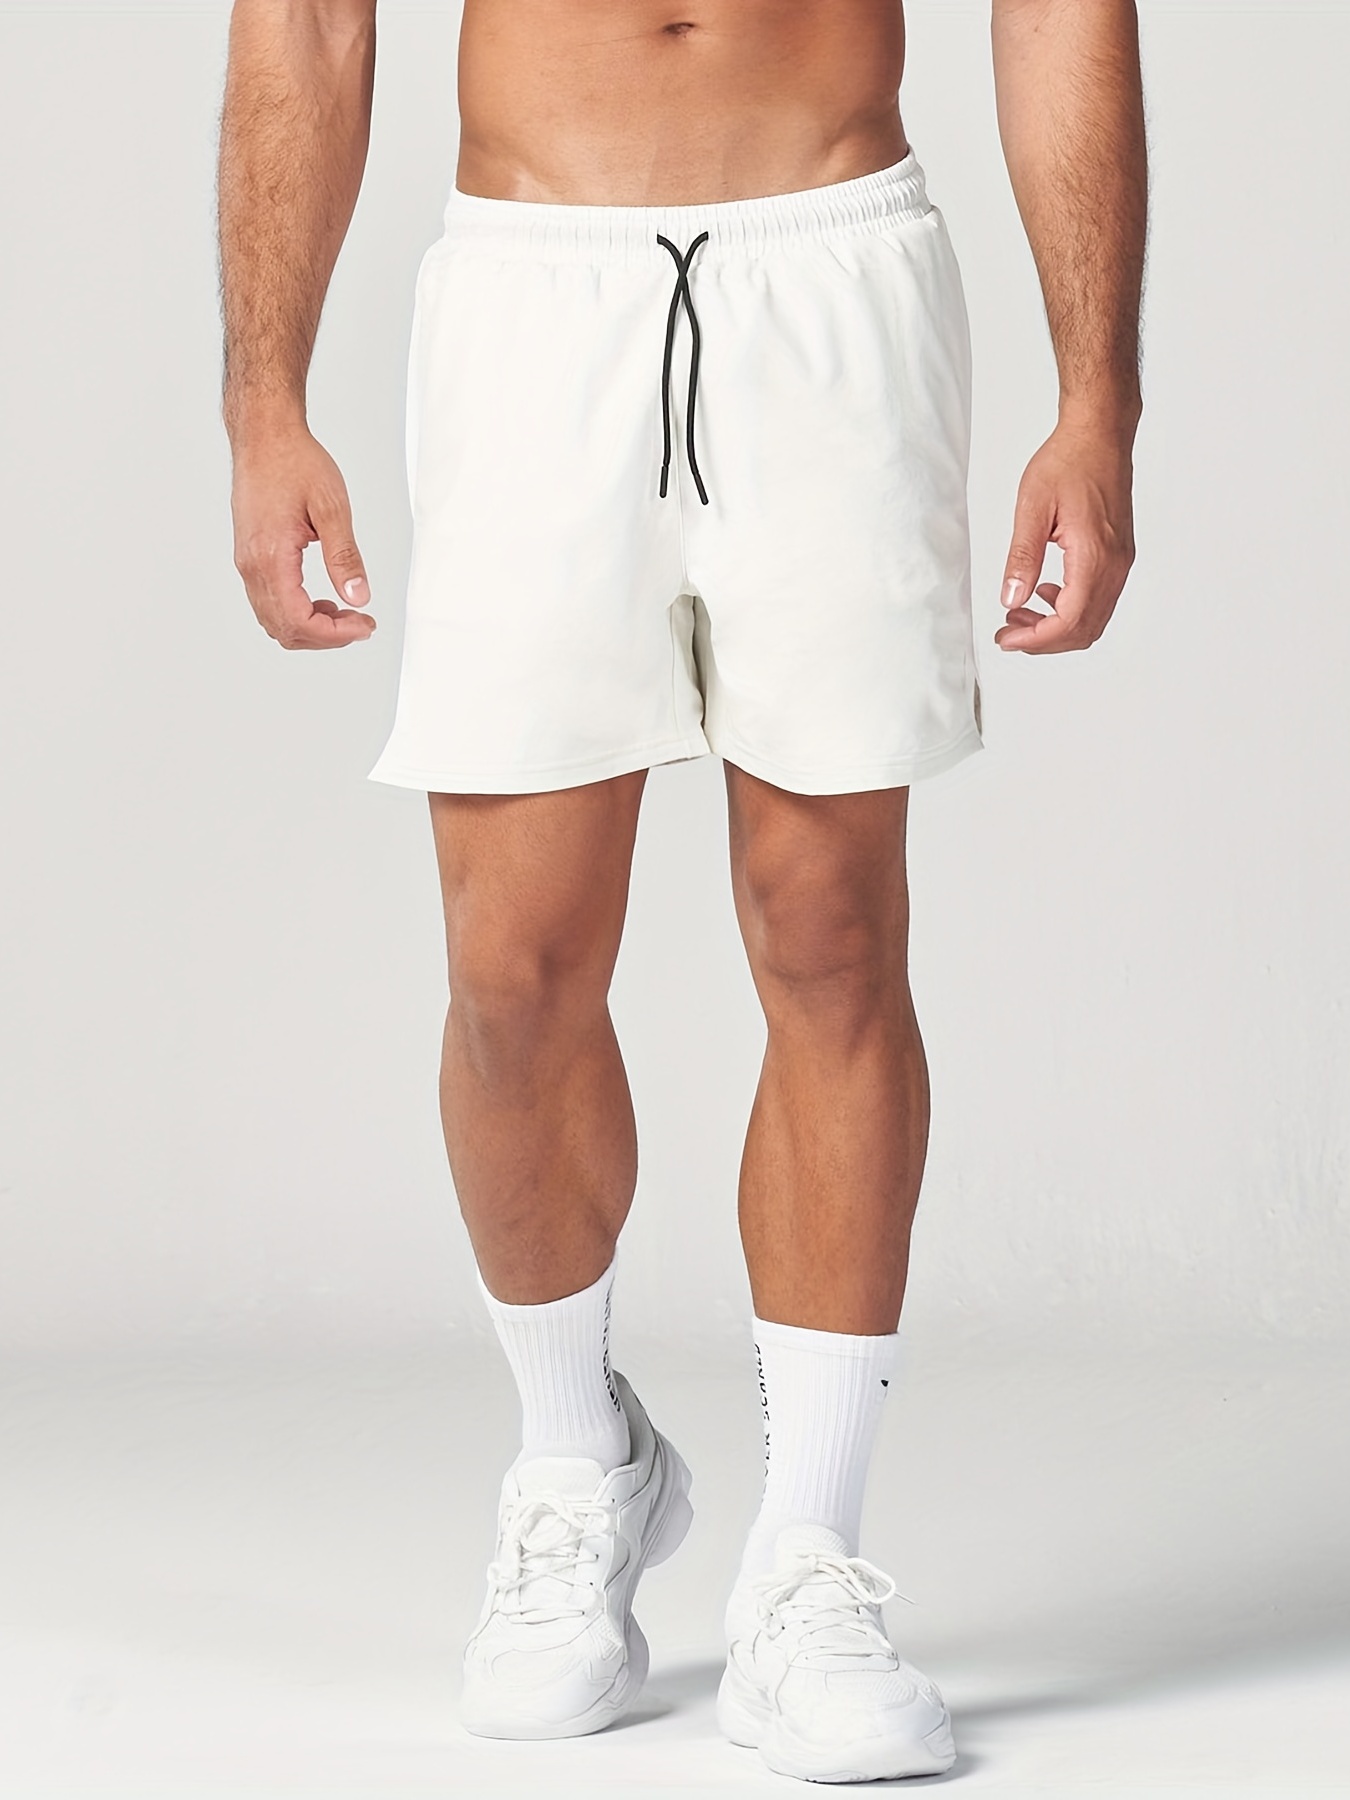  Mens Outdoor Summer Quick Dry Shorts Casual